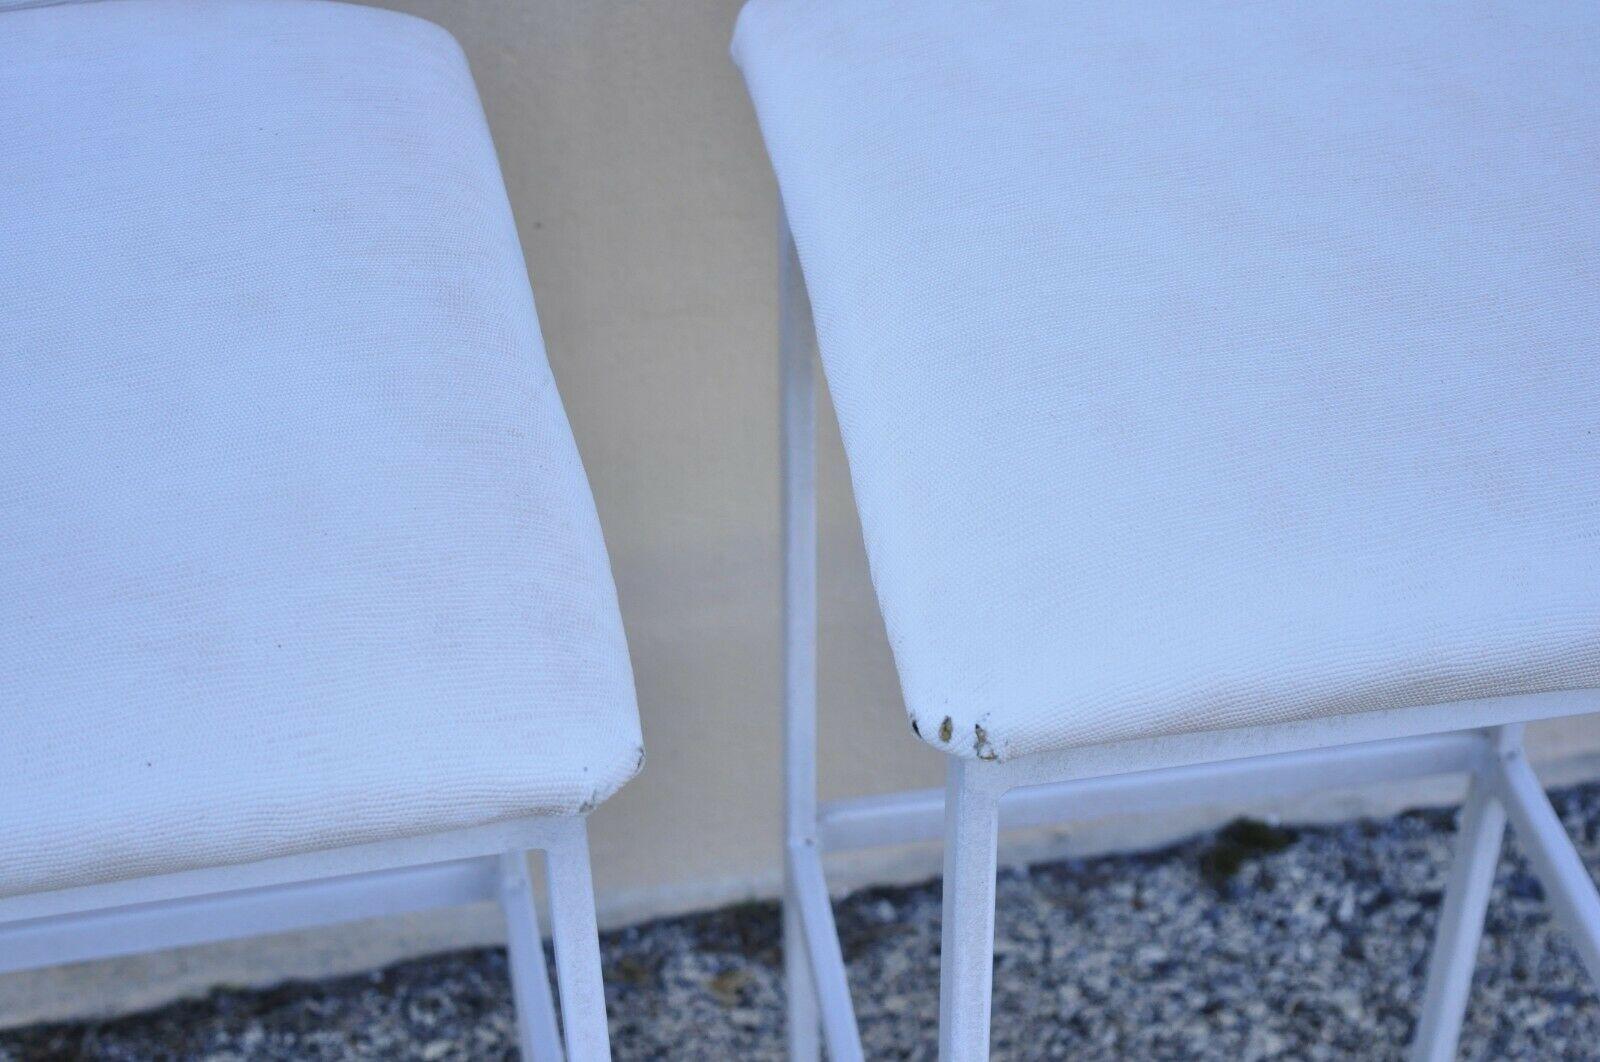 20th Century Minson Ent. Contemporary Modern White Metal Sculpted Barstools Chair - Set of 4 For Sale